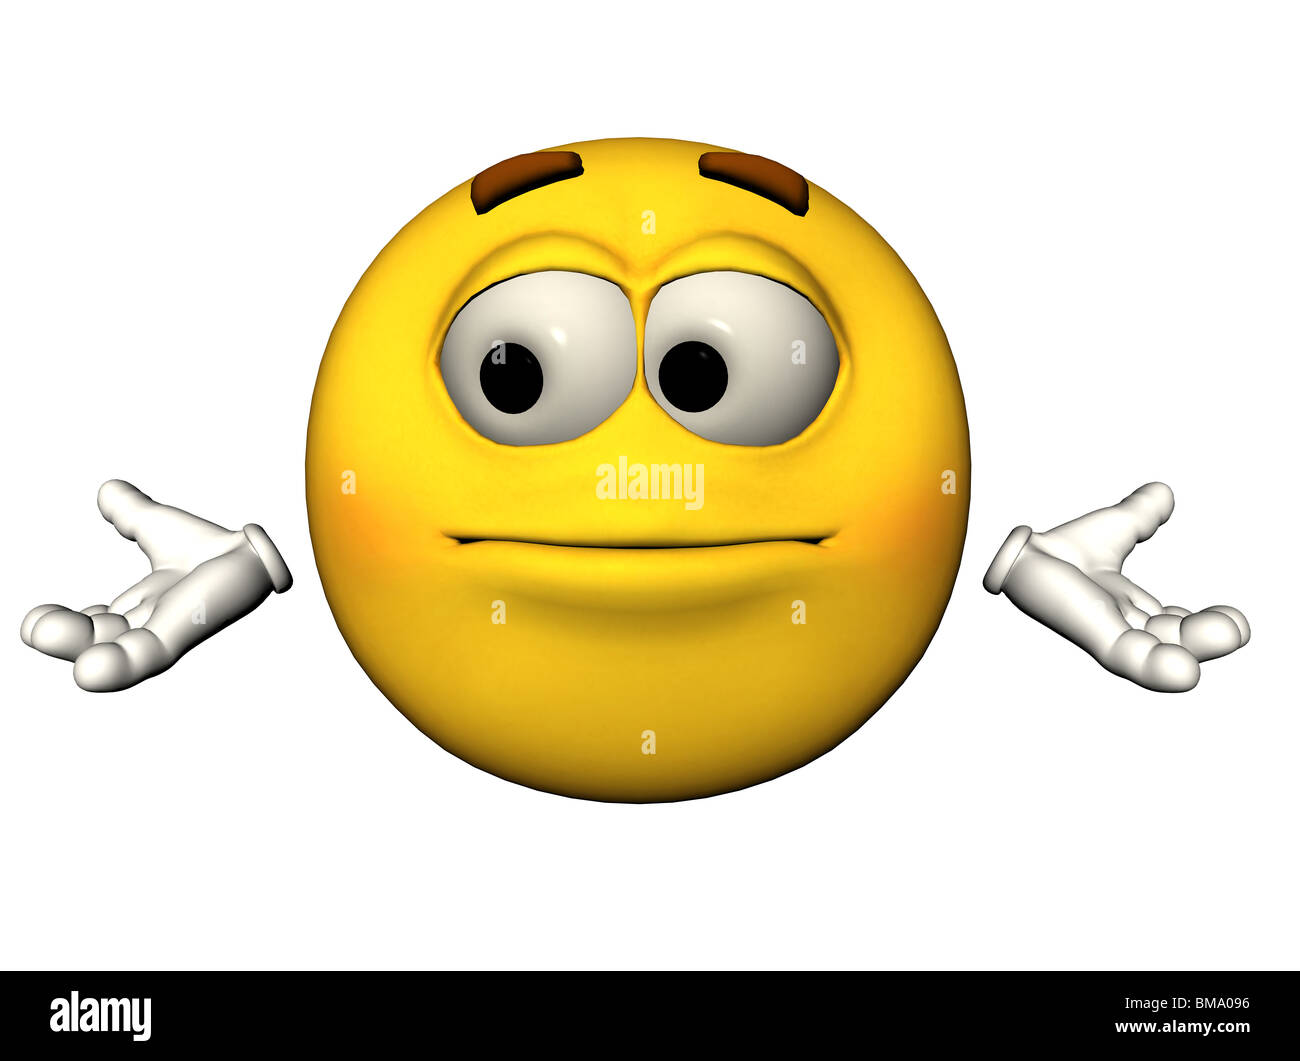 3D illustration of a helpless emoticon Stock Photo